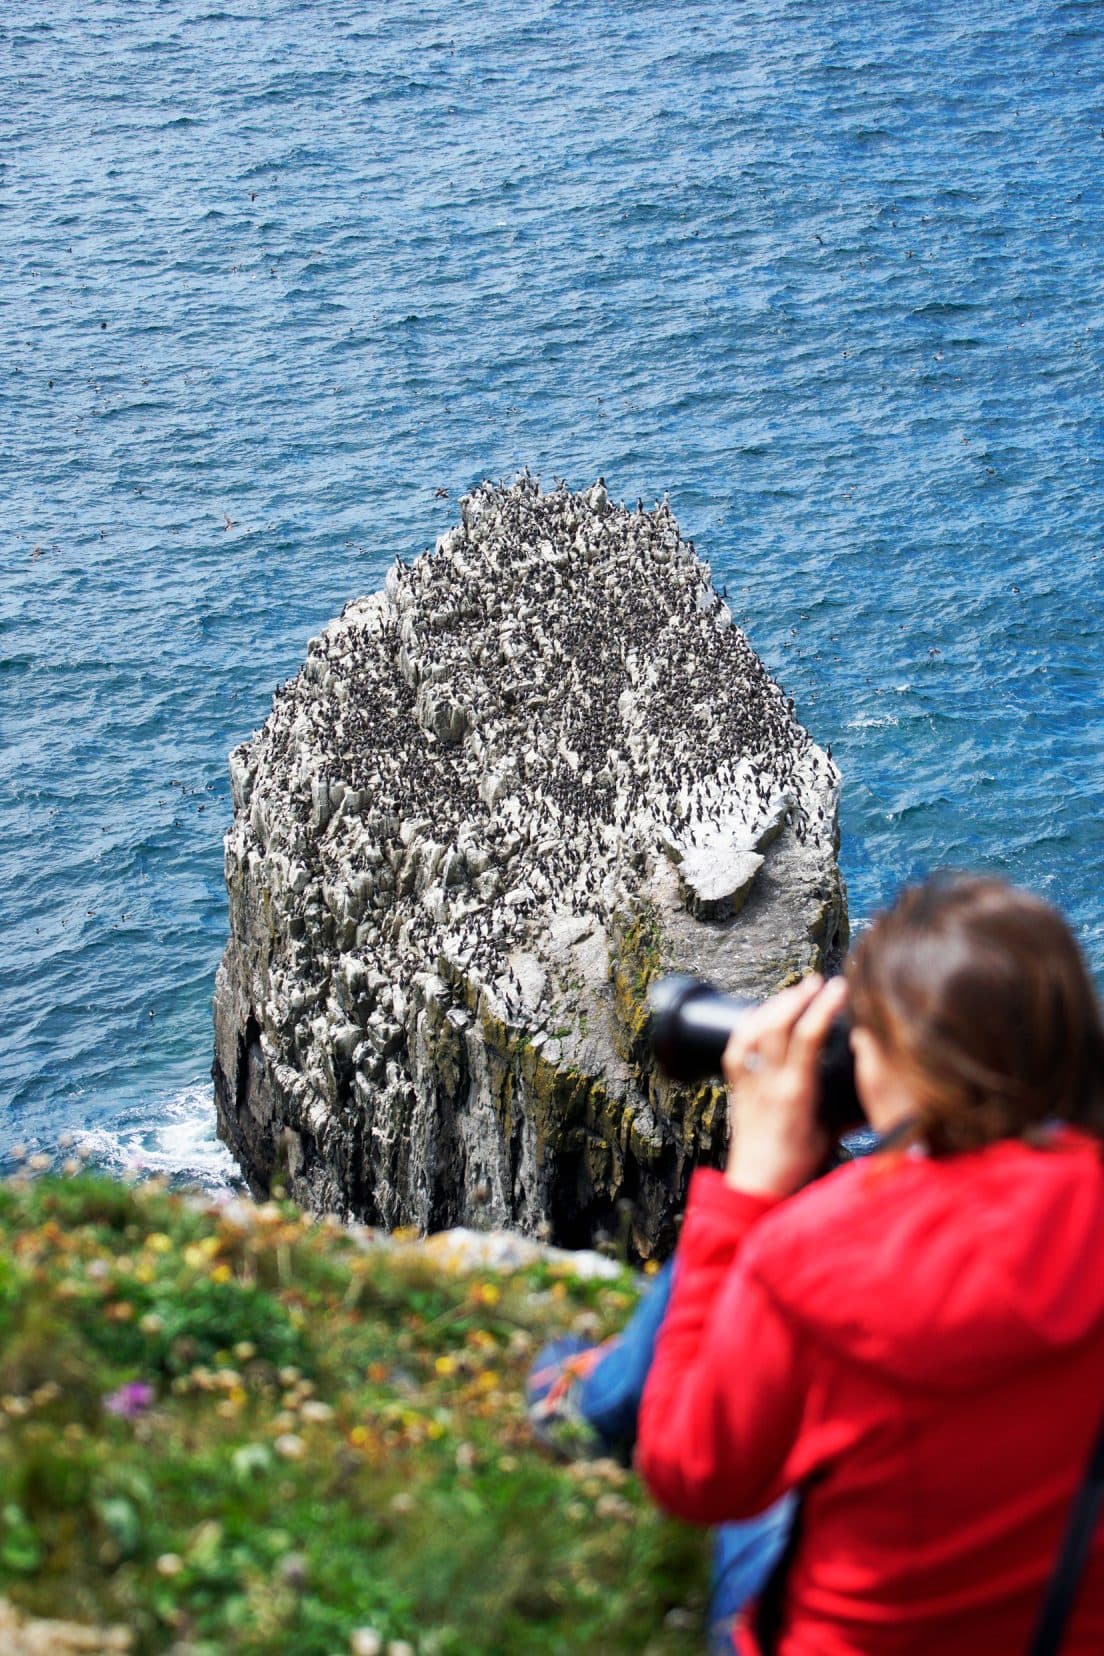 Pembrokeshire Itinerary: Shelley sat on edge of cliff taking a photo of the hundreds of guillemots on top of a rock in the sea